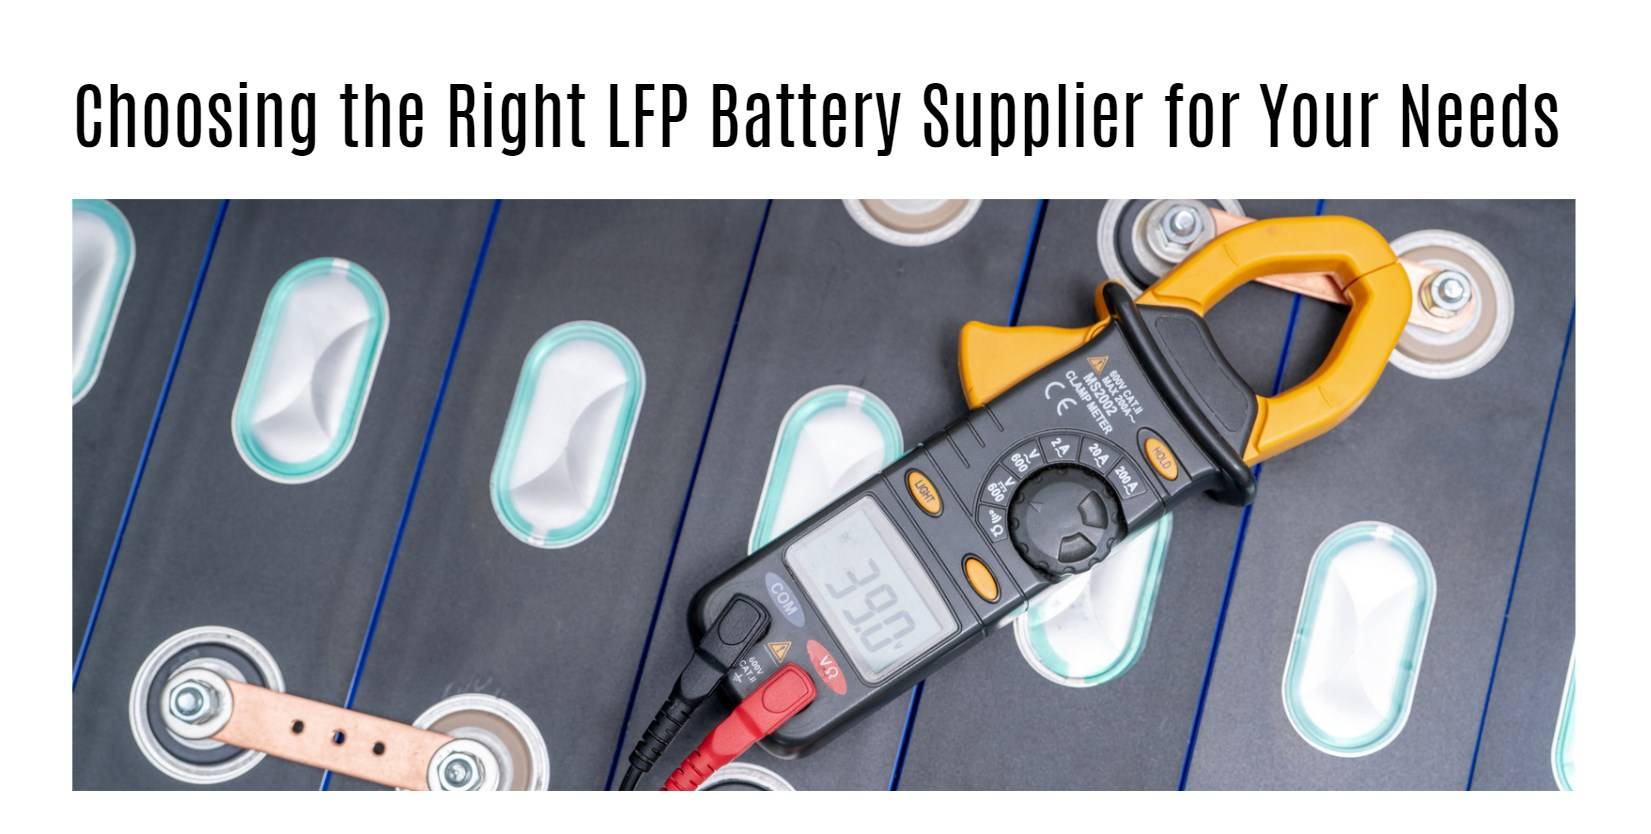 Conclusion: Choosing the Right LFP Battery Supplier for Your Needs